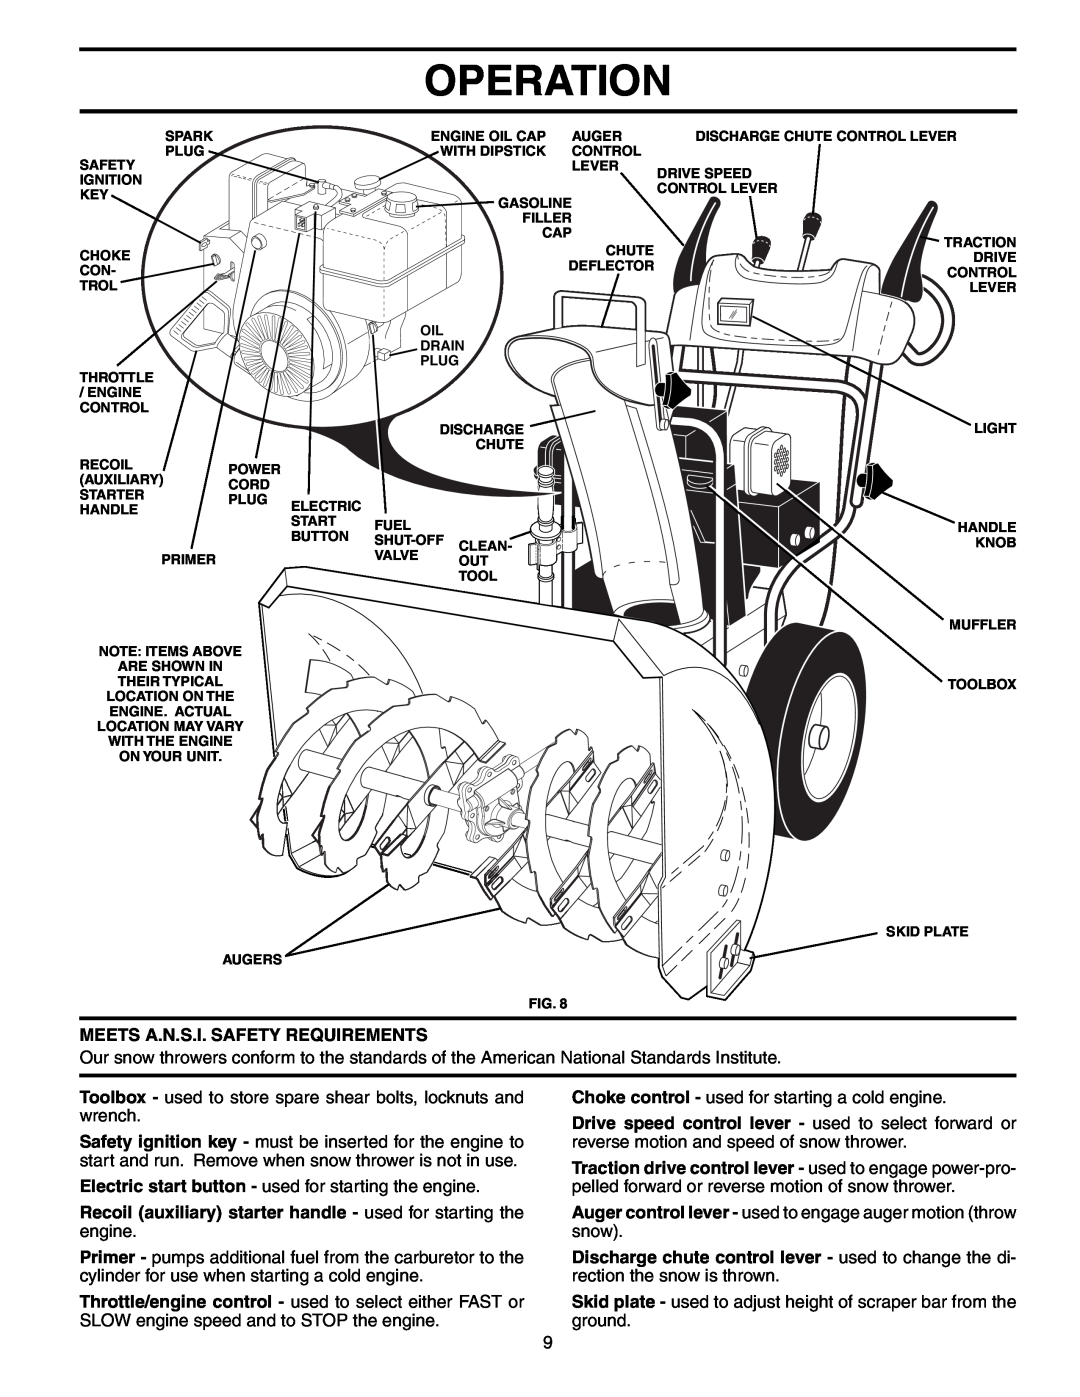 Poulan 192038 owner manual Operation, Meets A.N.S.I. Safety Requirements 